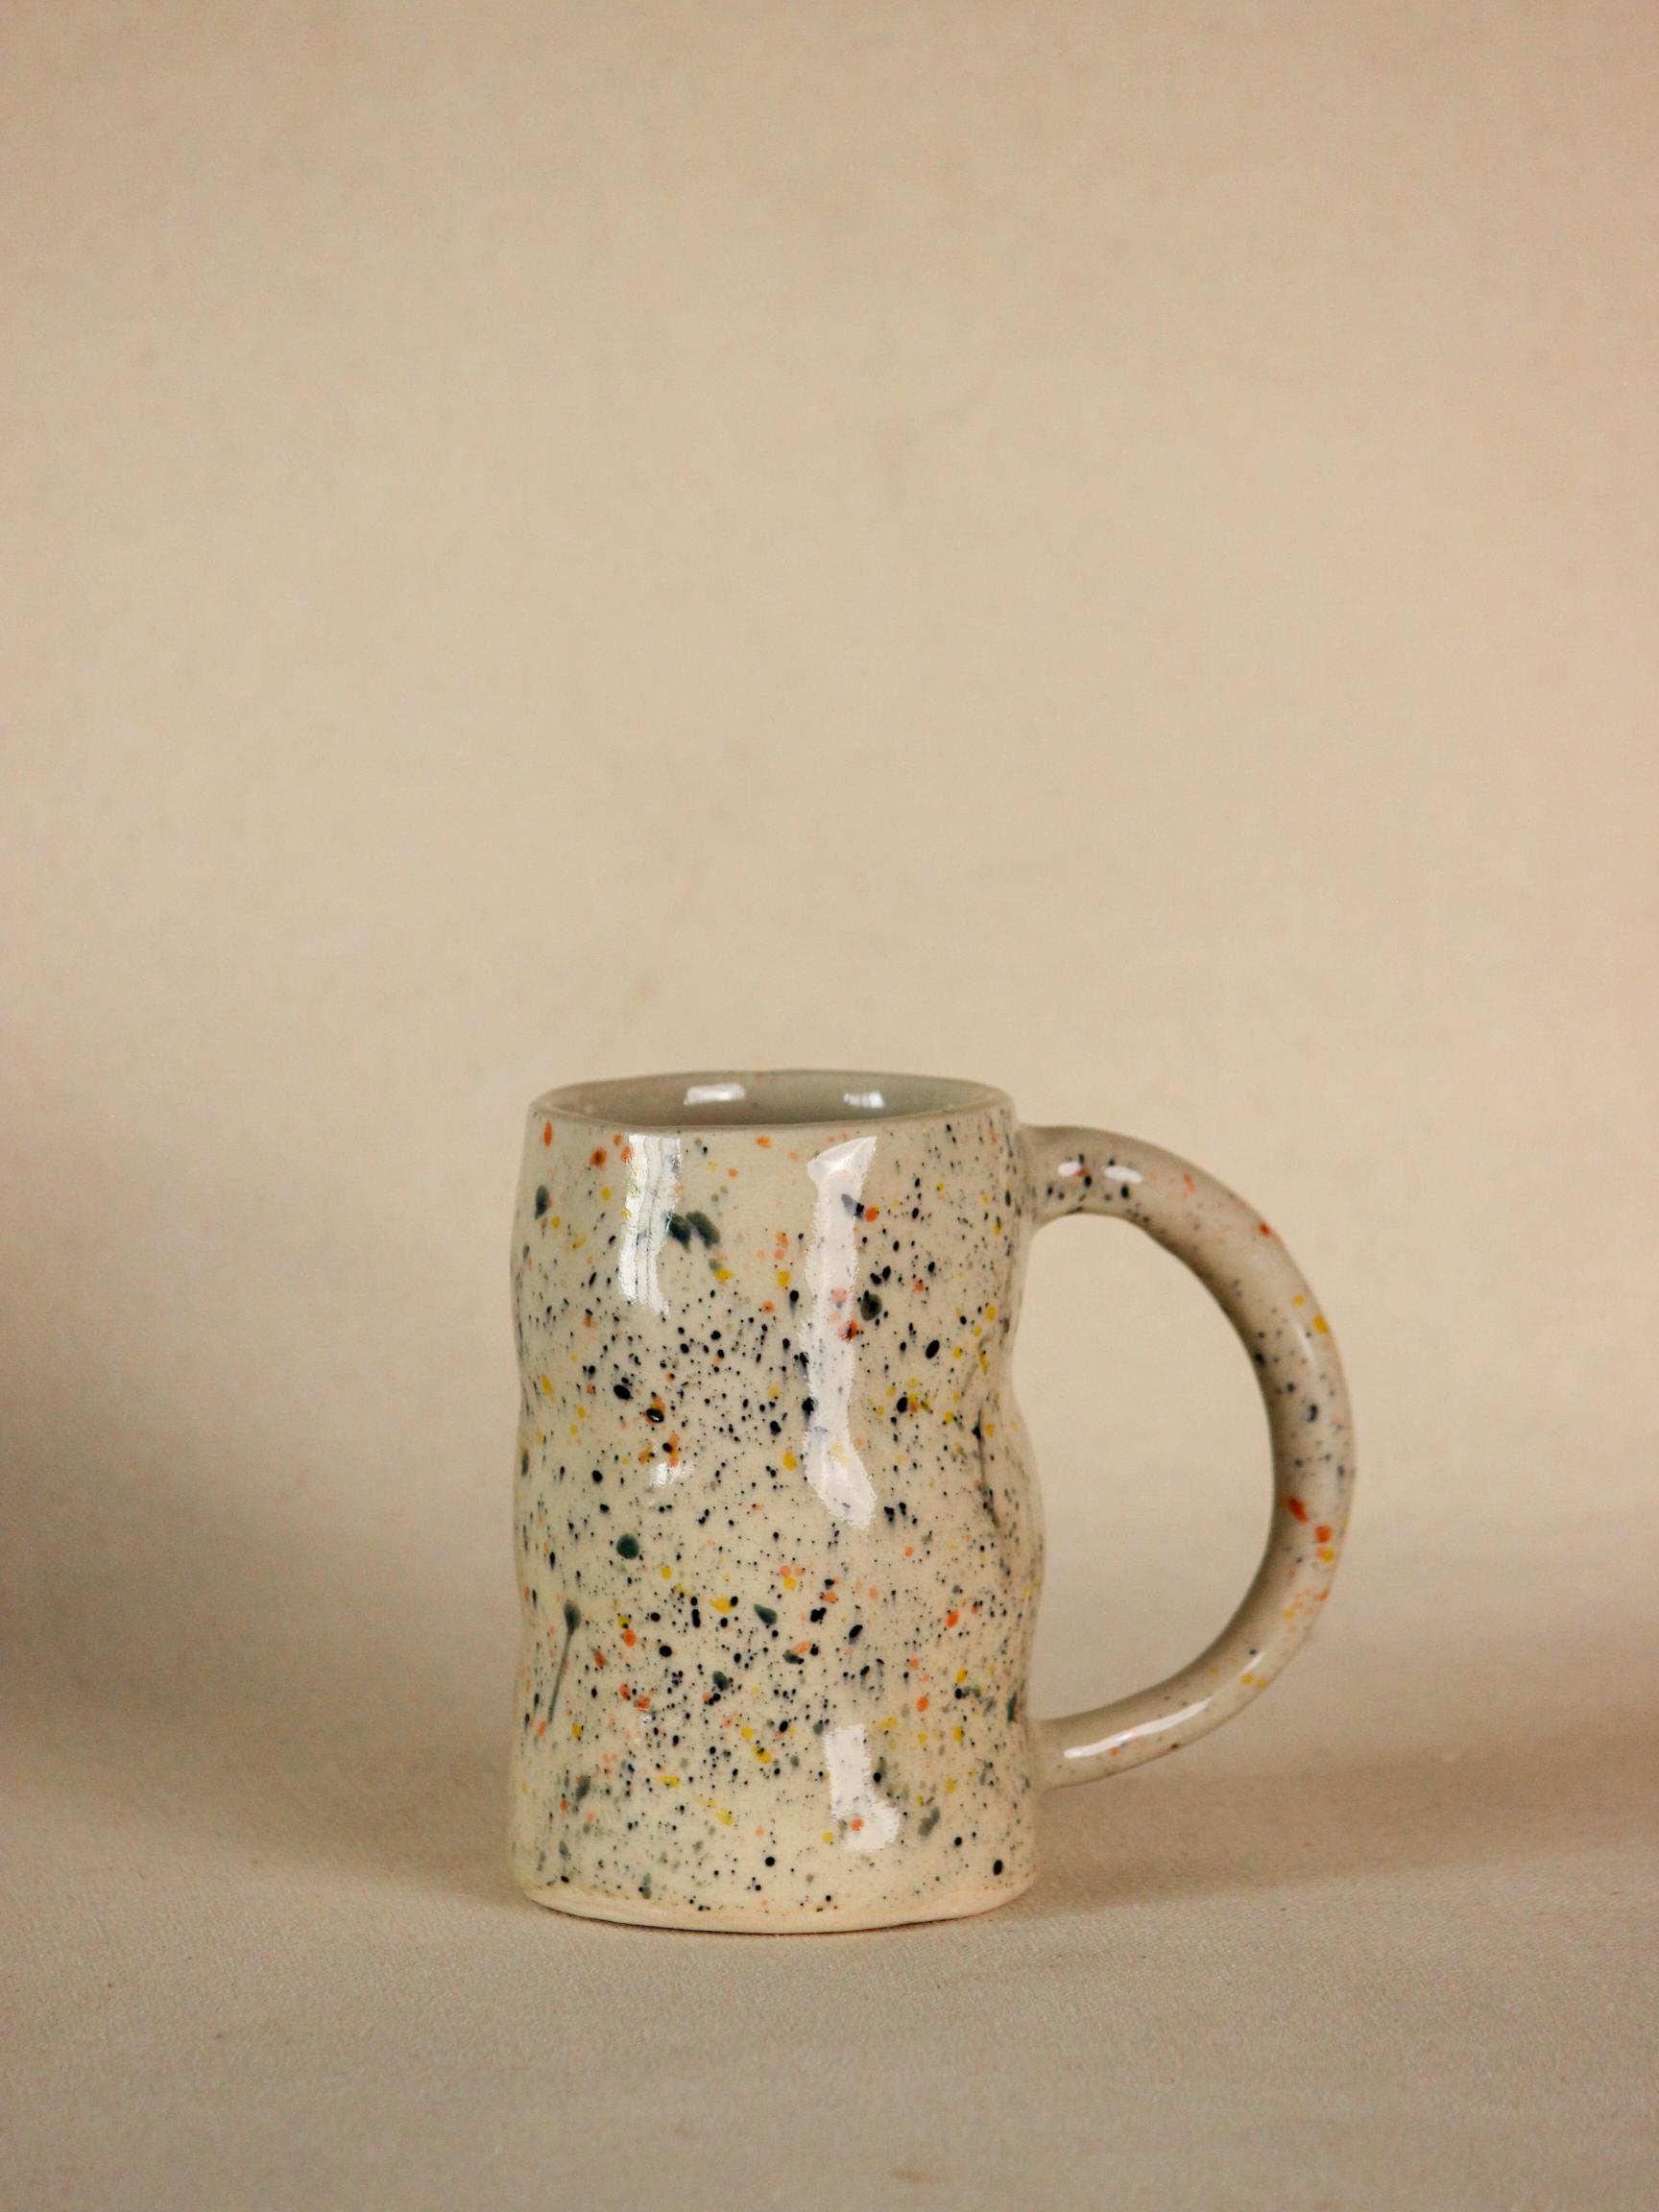 The Orby House Multicolored Speckled Mug